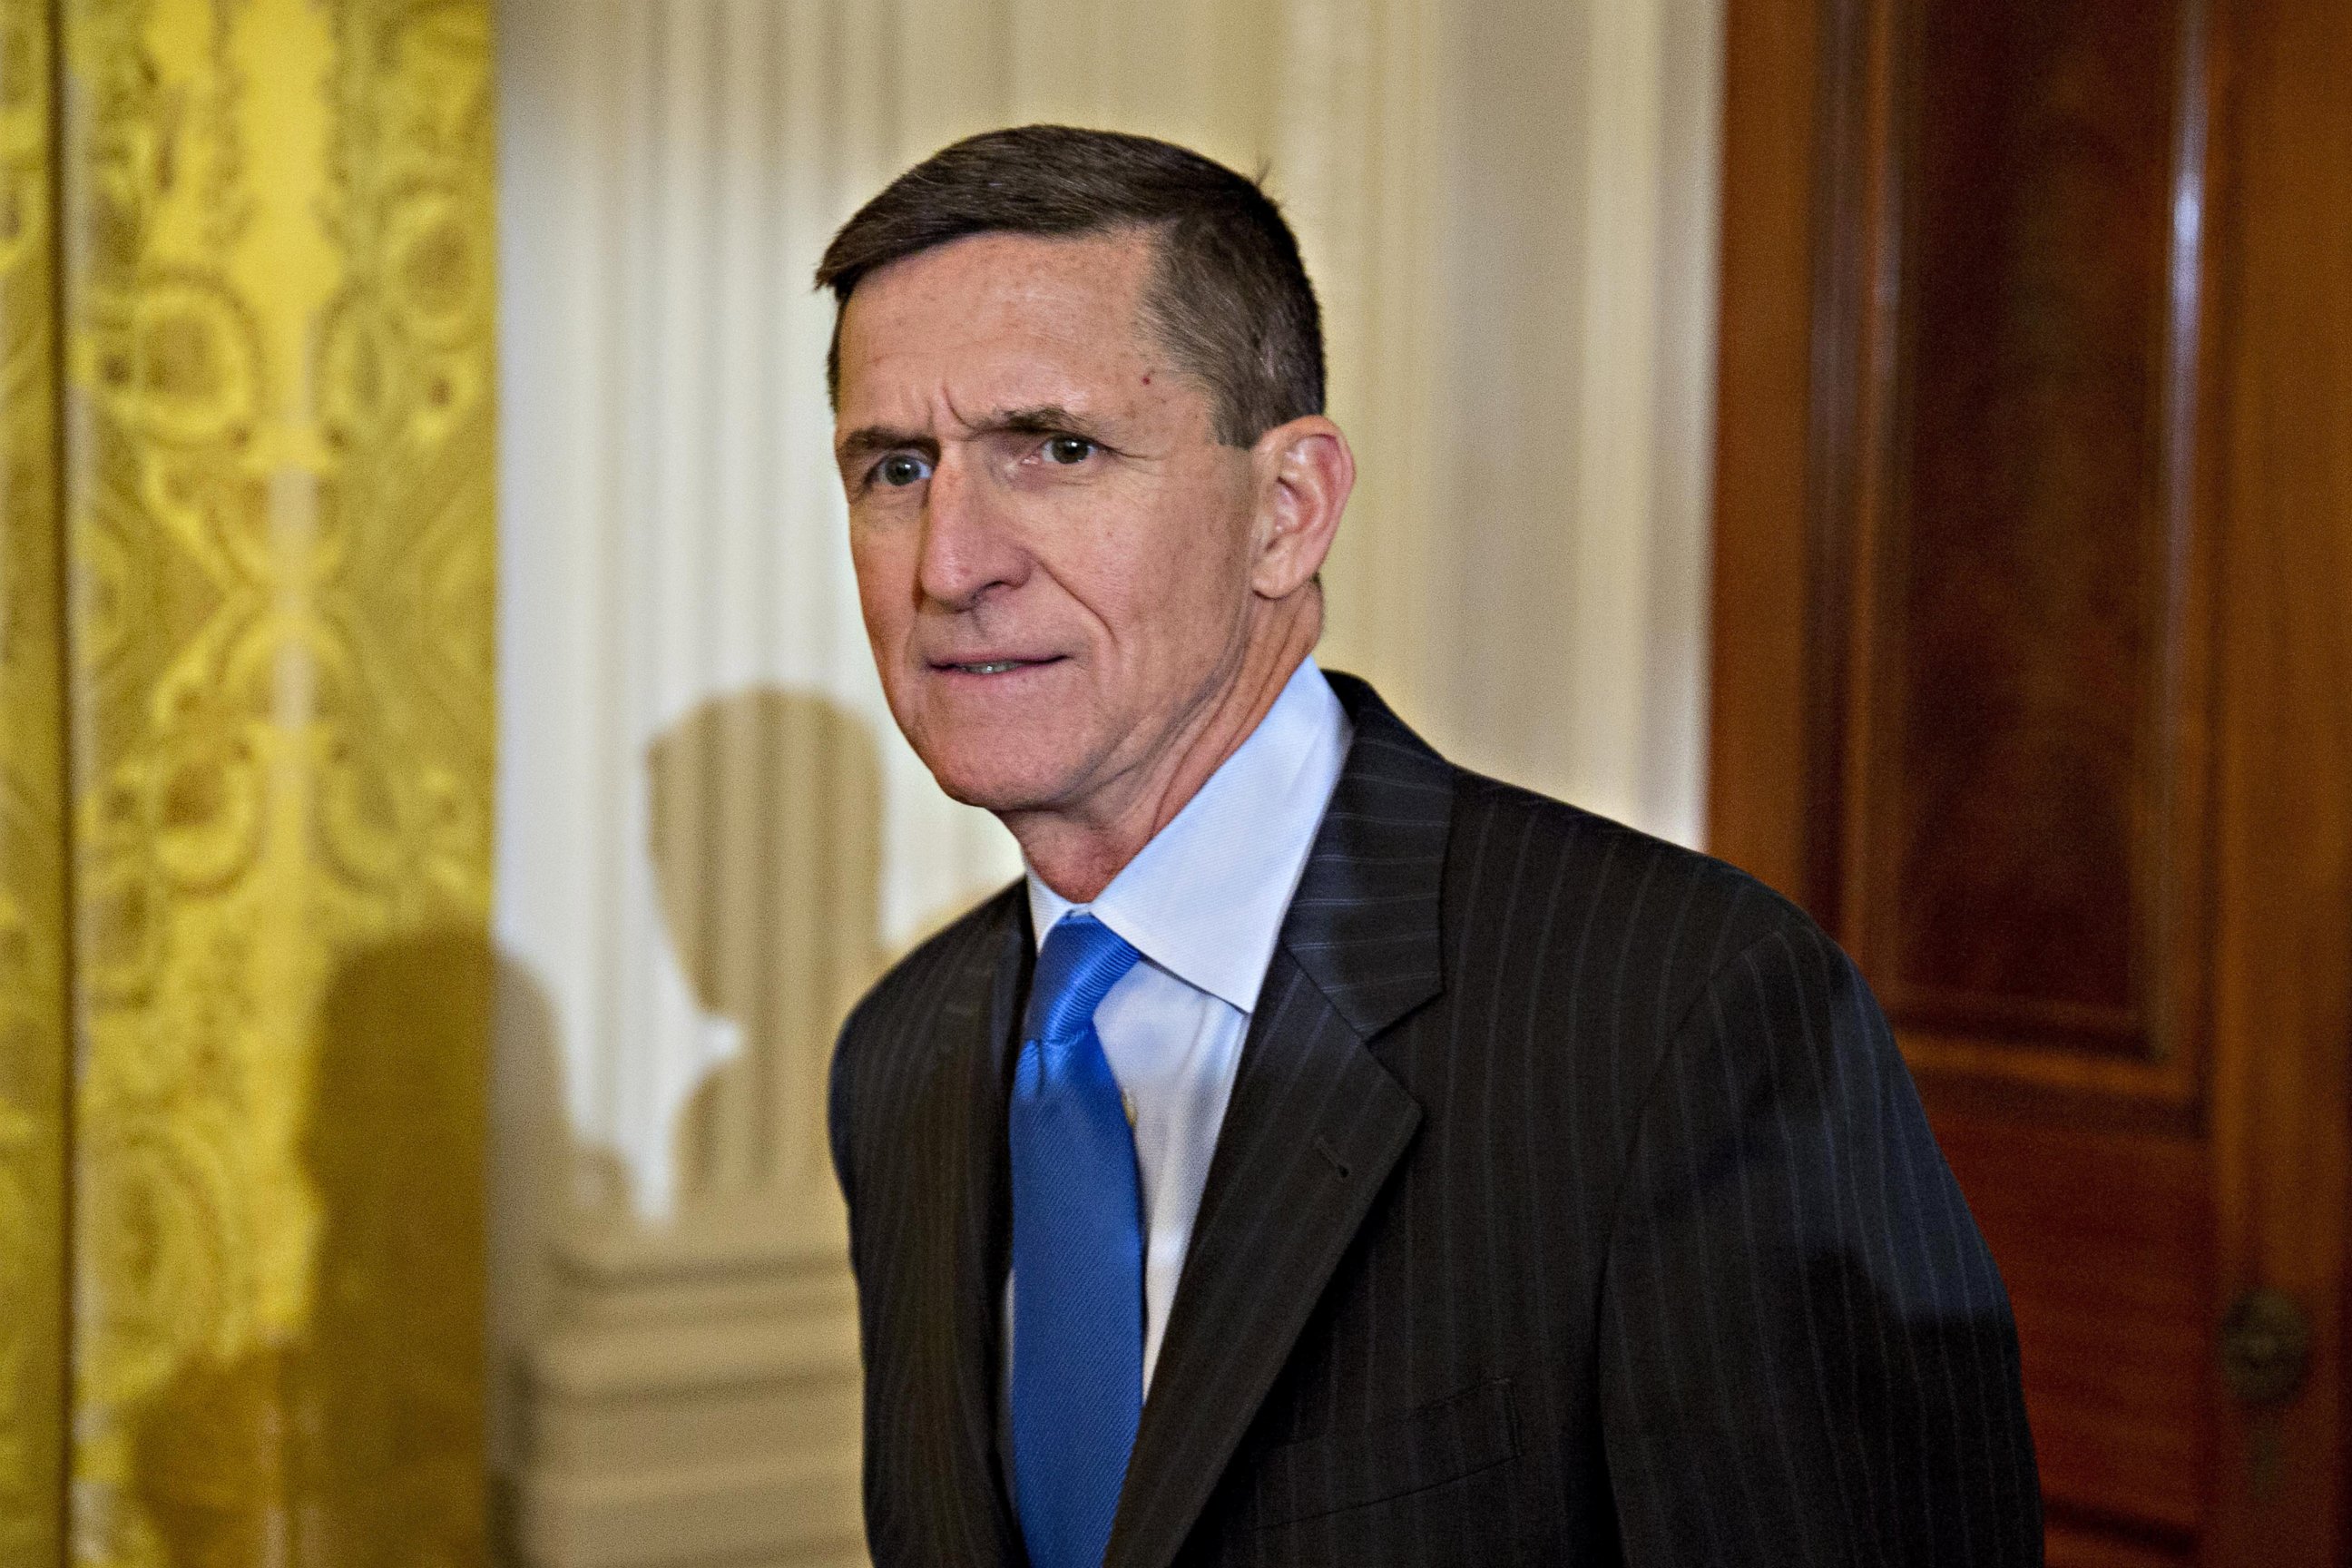 PHOTO: Former national security adviser Michael Flynn is seen in this file photo arriving at a swearing in ceremony of White House senior staff in the East Room of the White House on January 22, 2017 in Washington, D.C.  